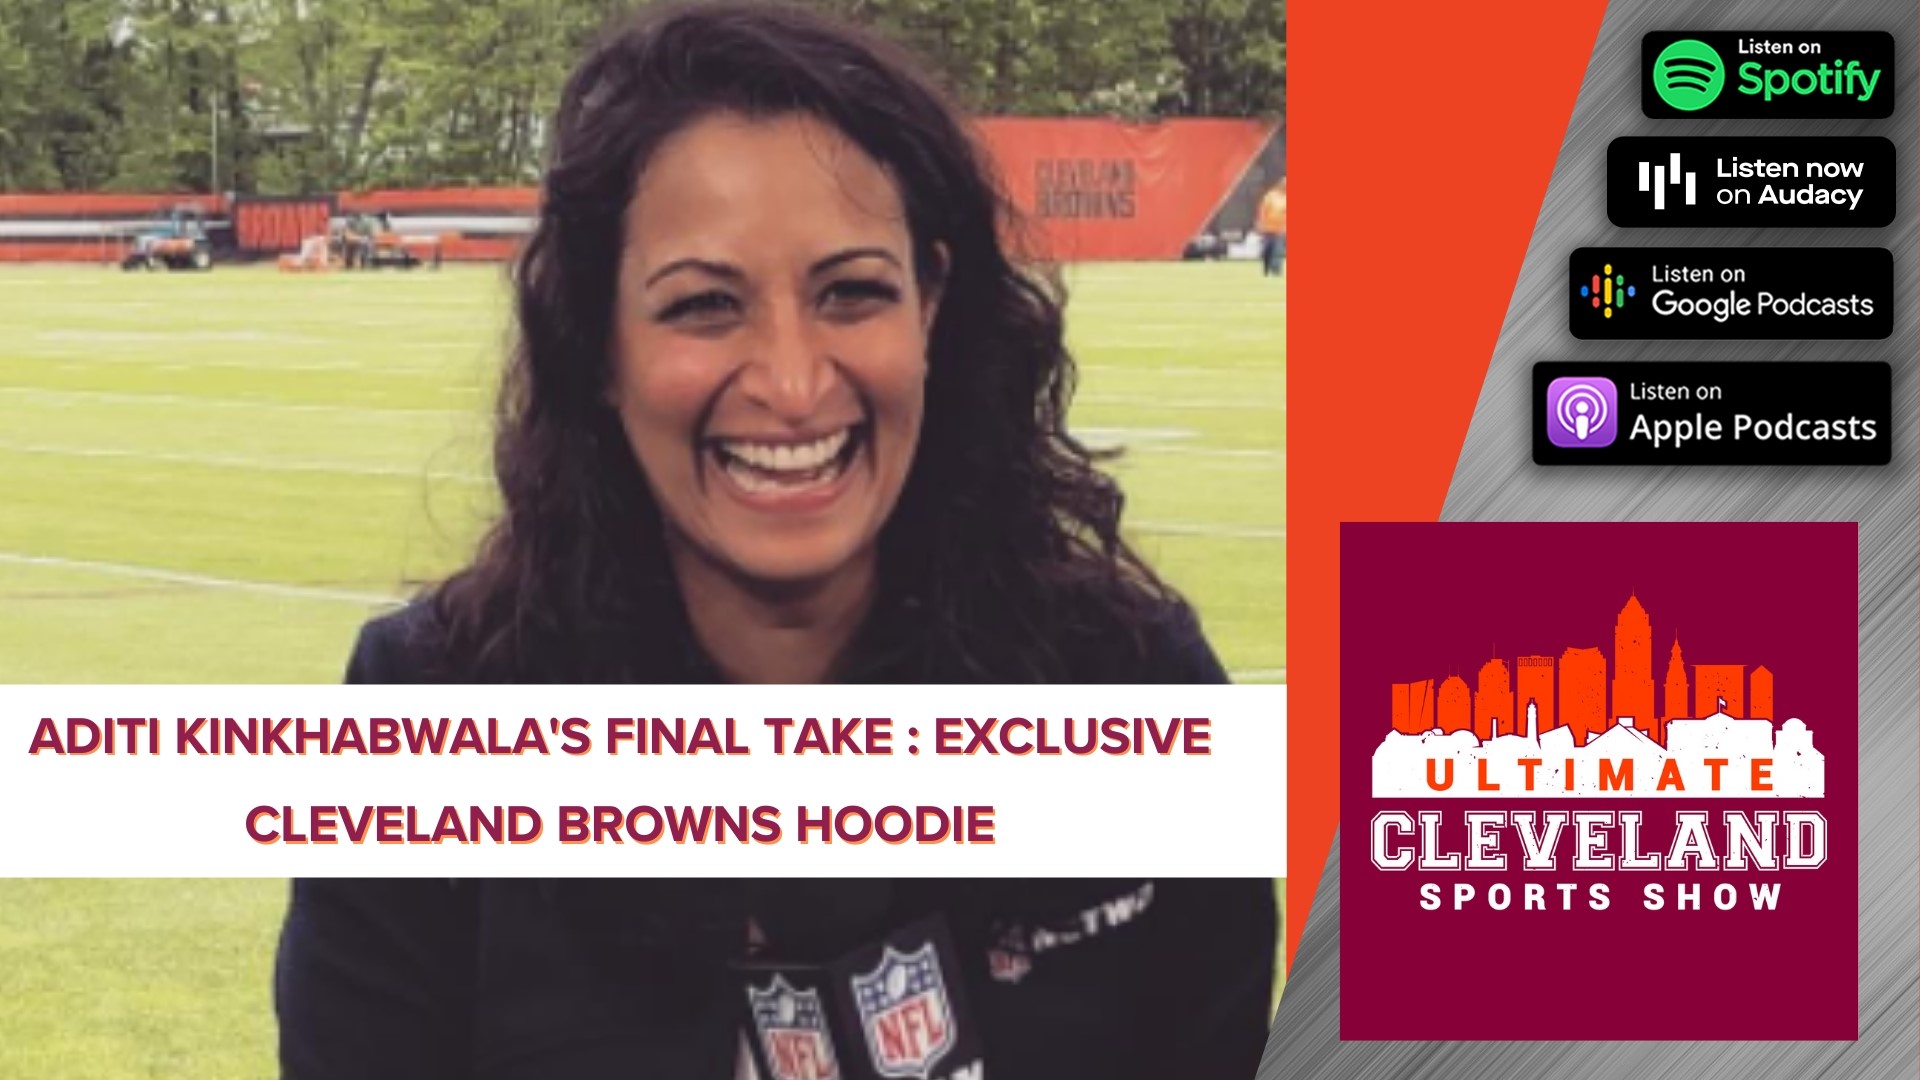 Aditi explains the story behind her exclusive Cleveland Browns hoodie that is not available on the market.